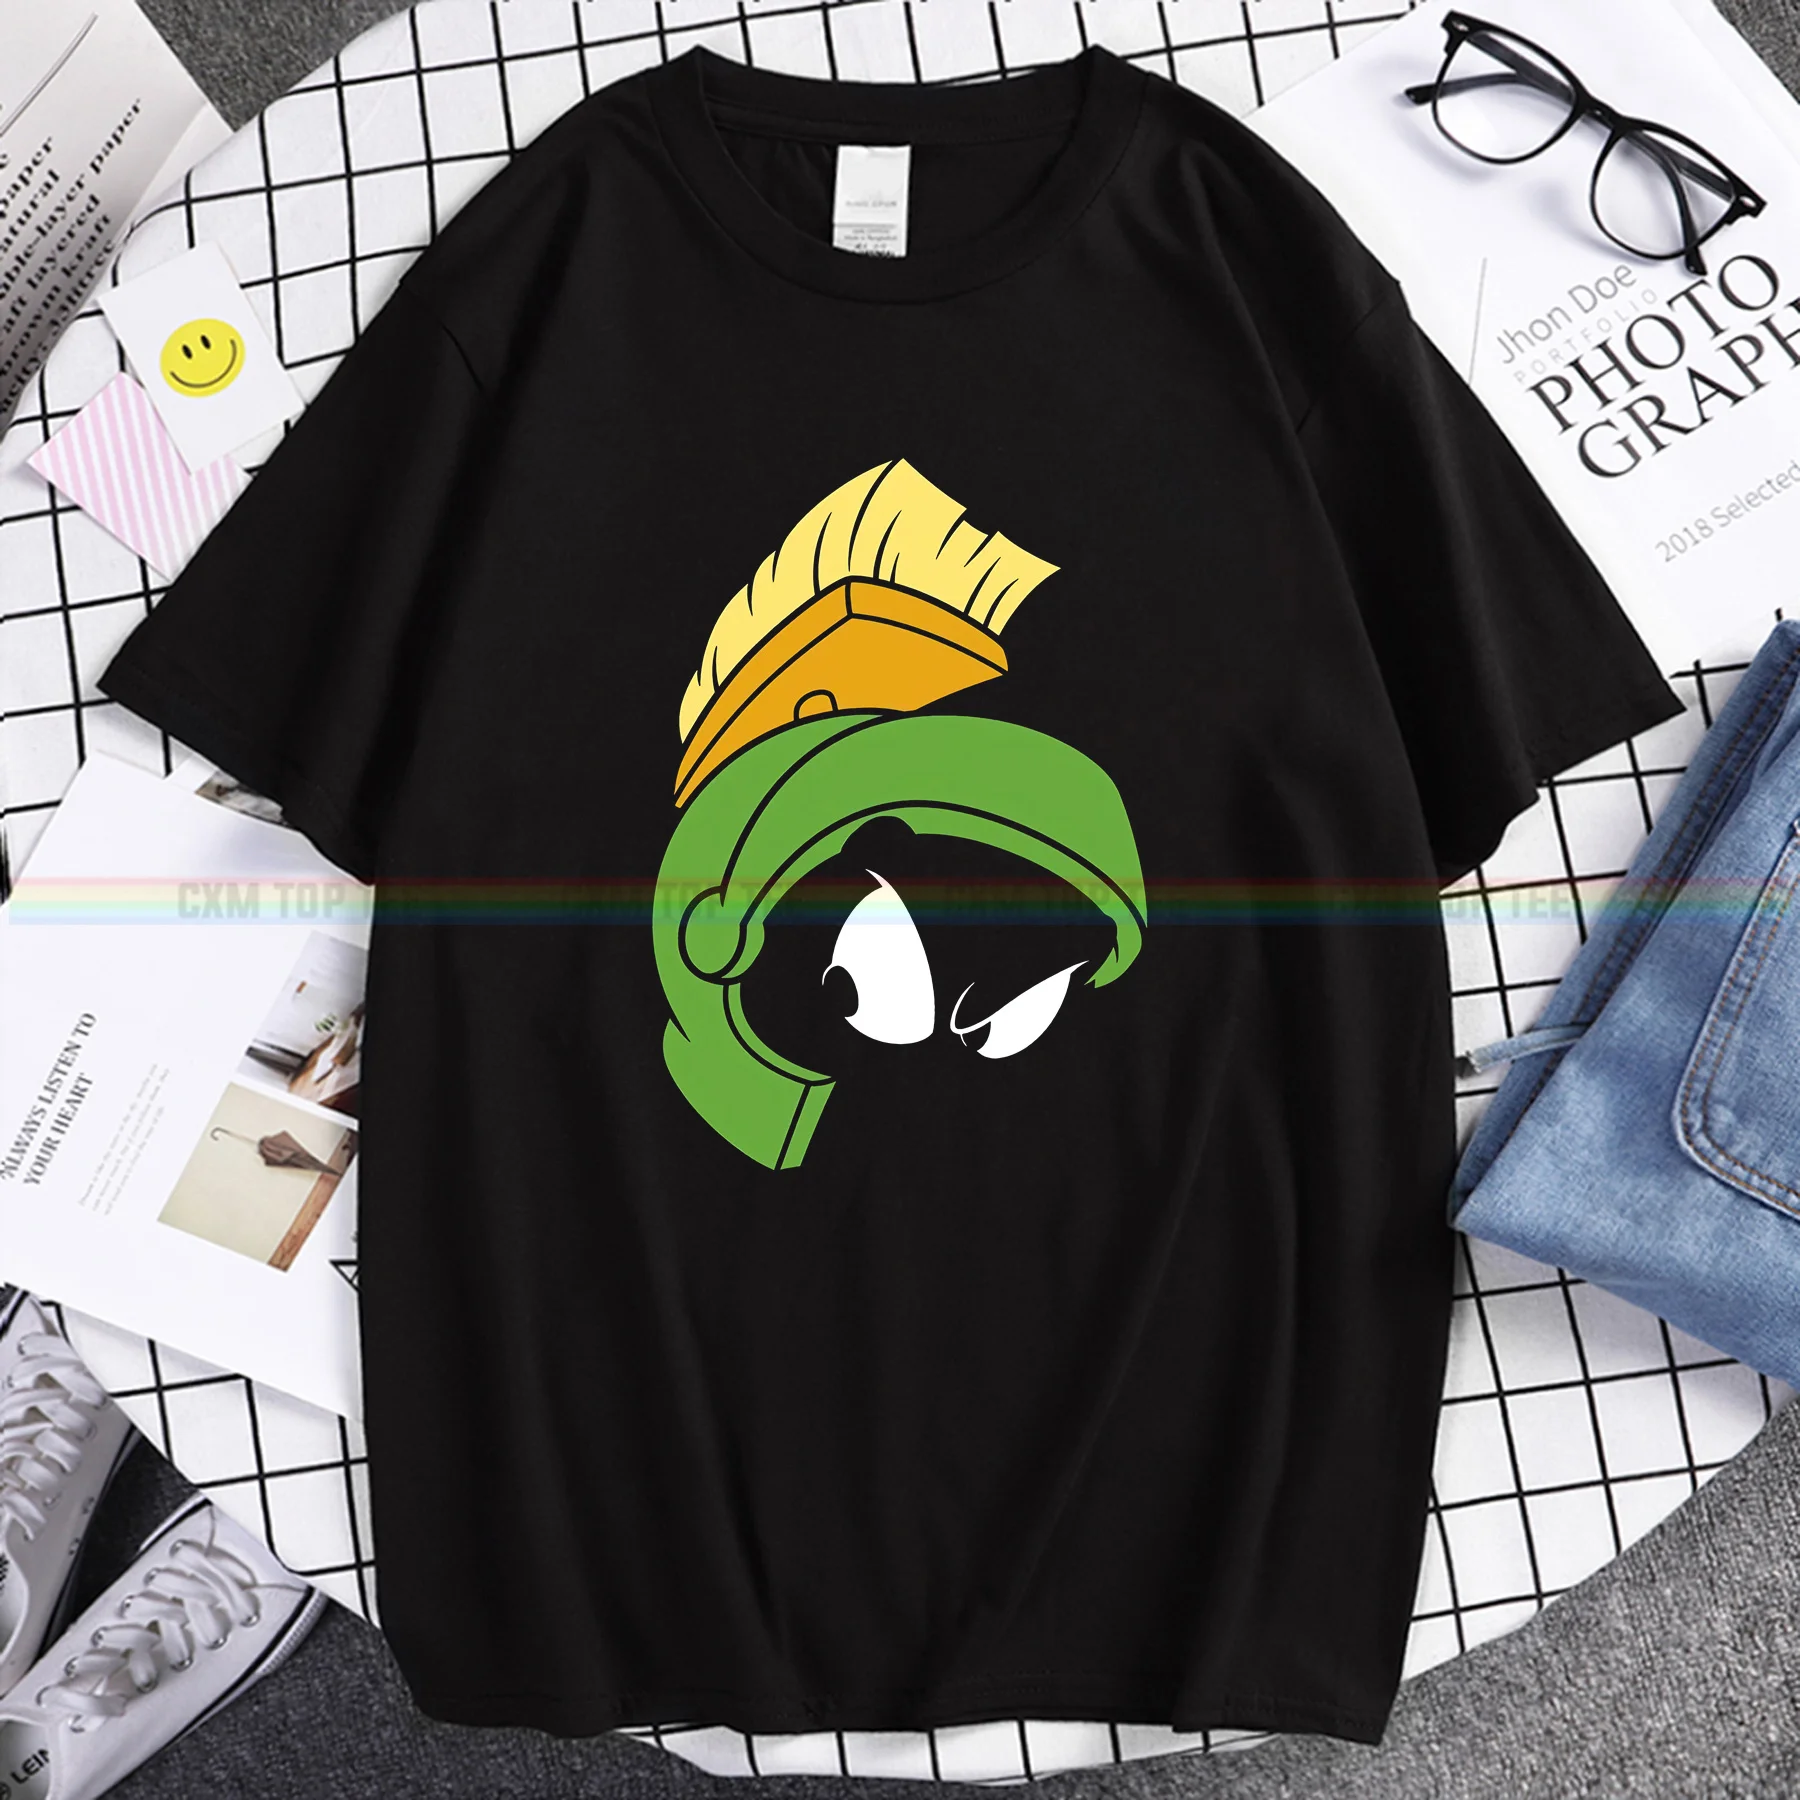 

Amazing male Tees Men t-shirt Casual Unique Oversized Buy Looney Tunes Marvin The Martian Dark Big Face T-shirt women T-shirts